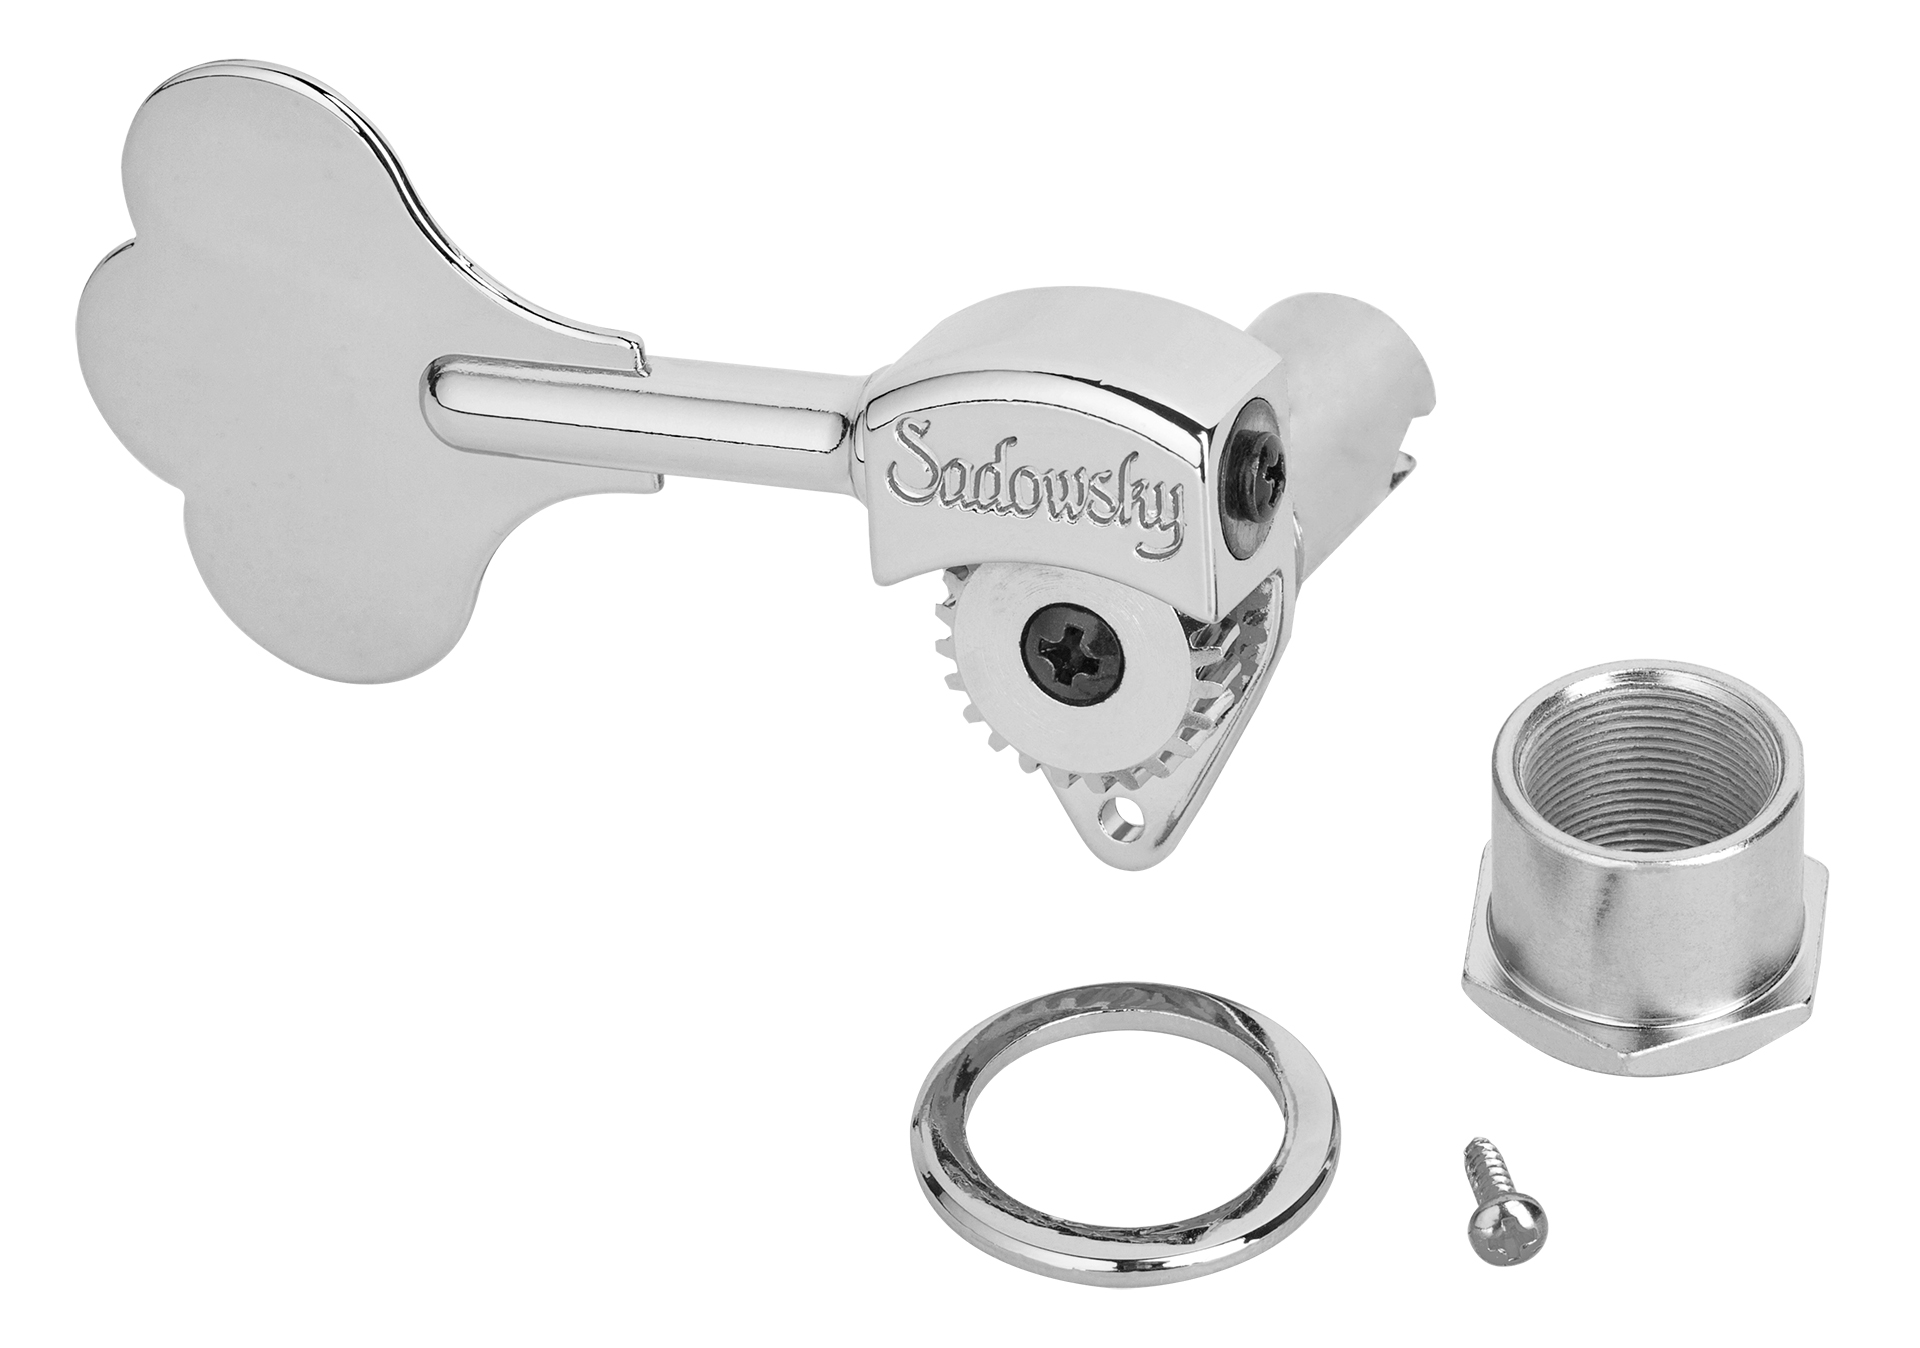 Sadowsky Parts - Light Machinehead with Open Gear - Chrome - Right (Treble) Side